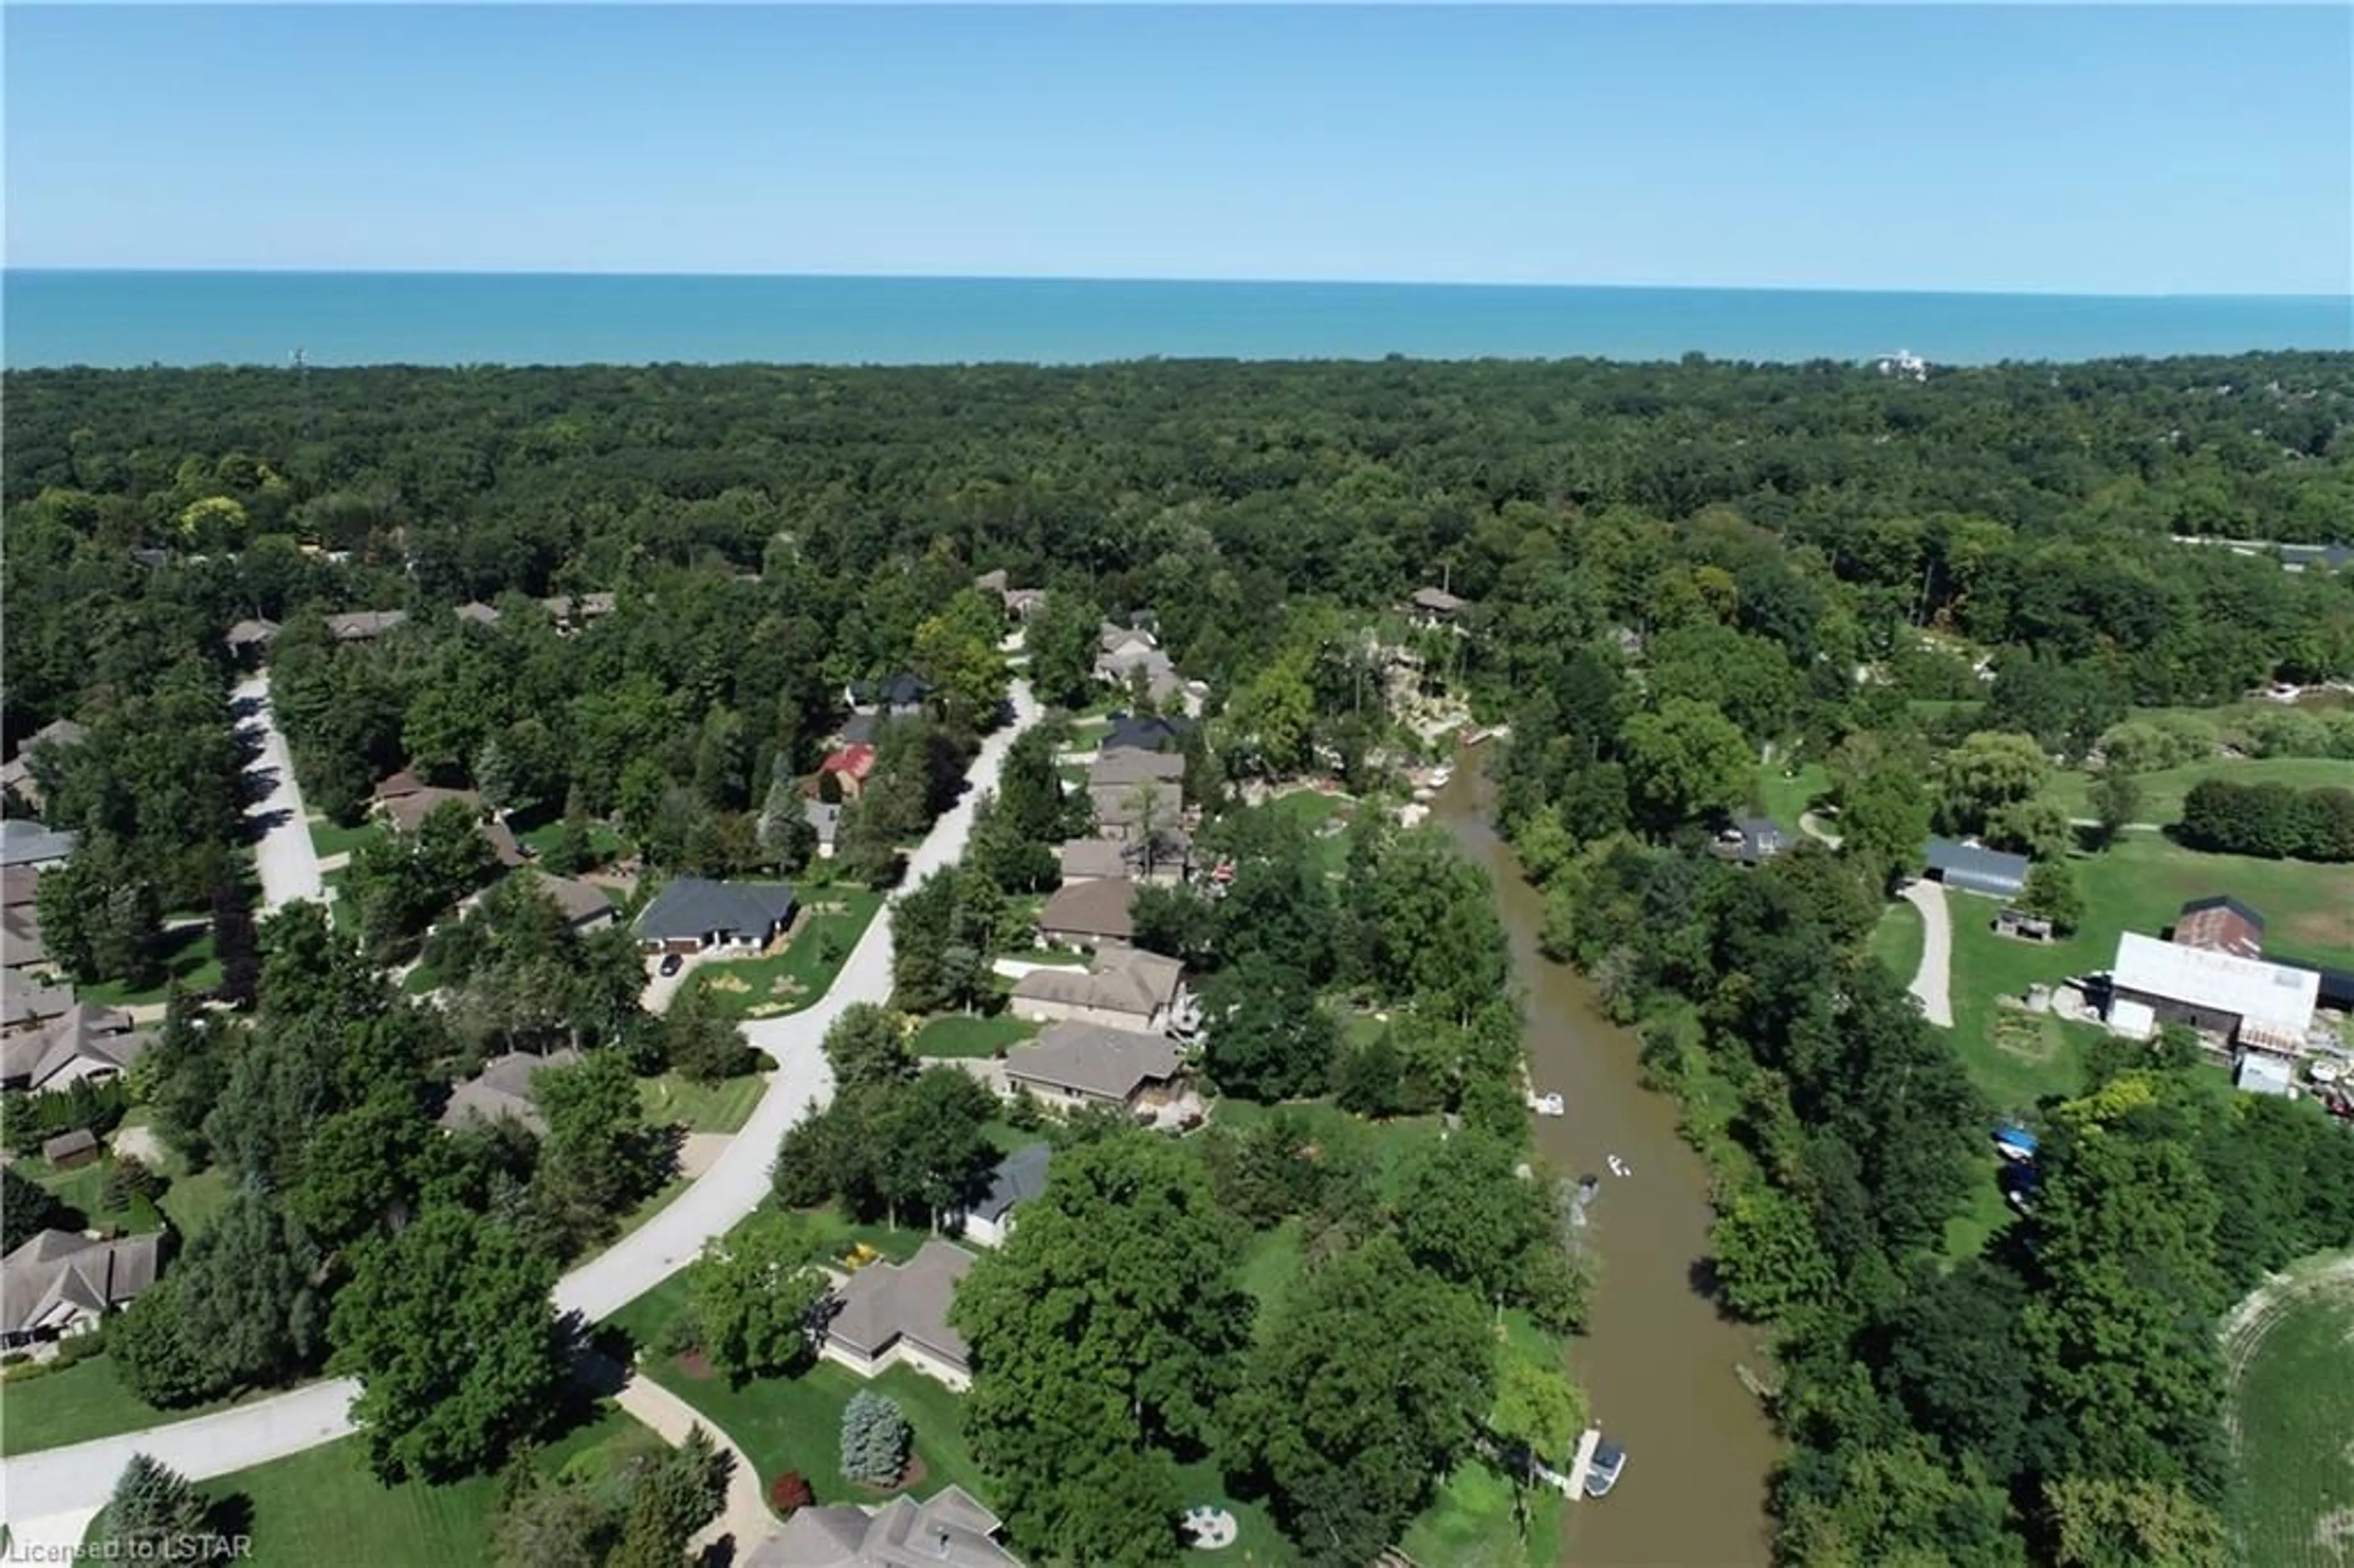 Lakeview for 10138 Merrywood Dr, Grand Bend Ontario N0M 1T0